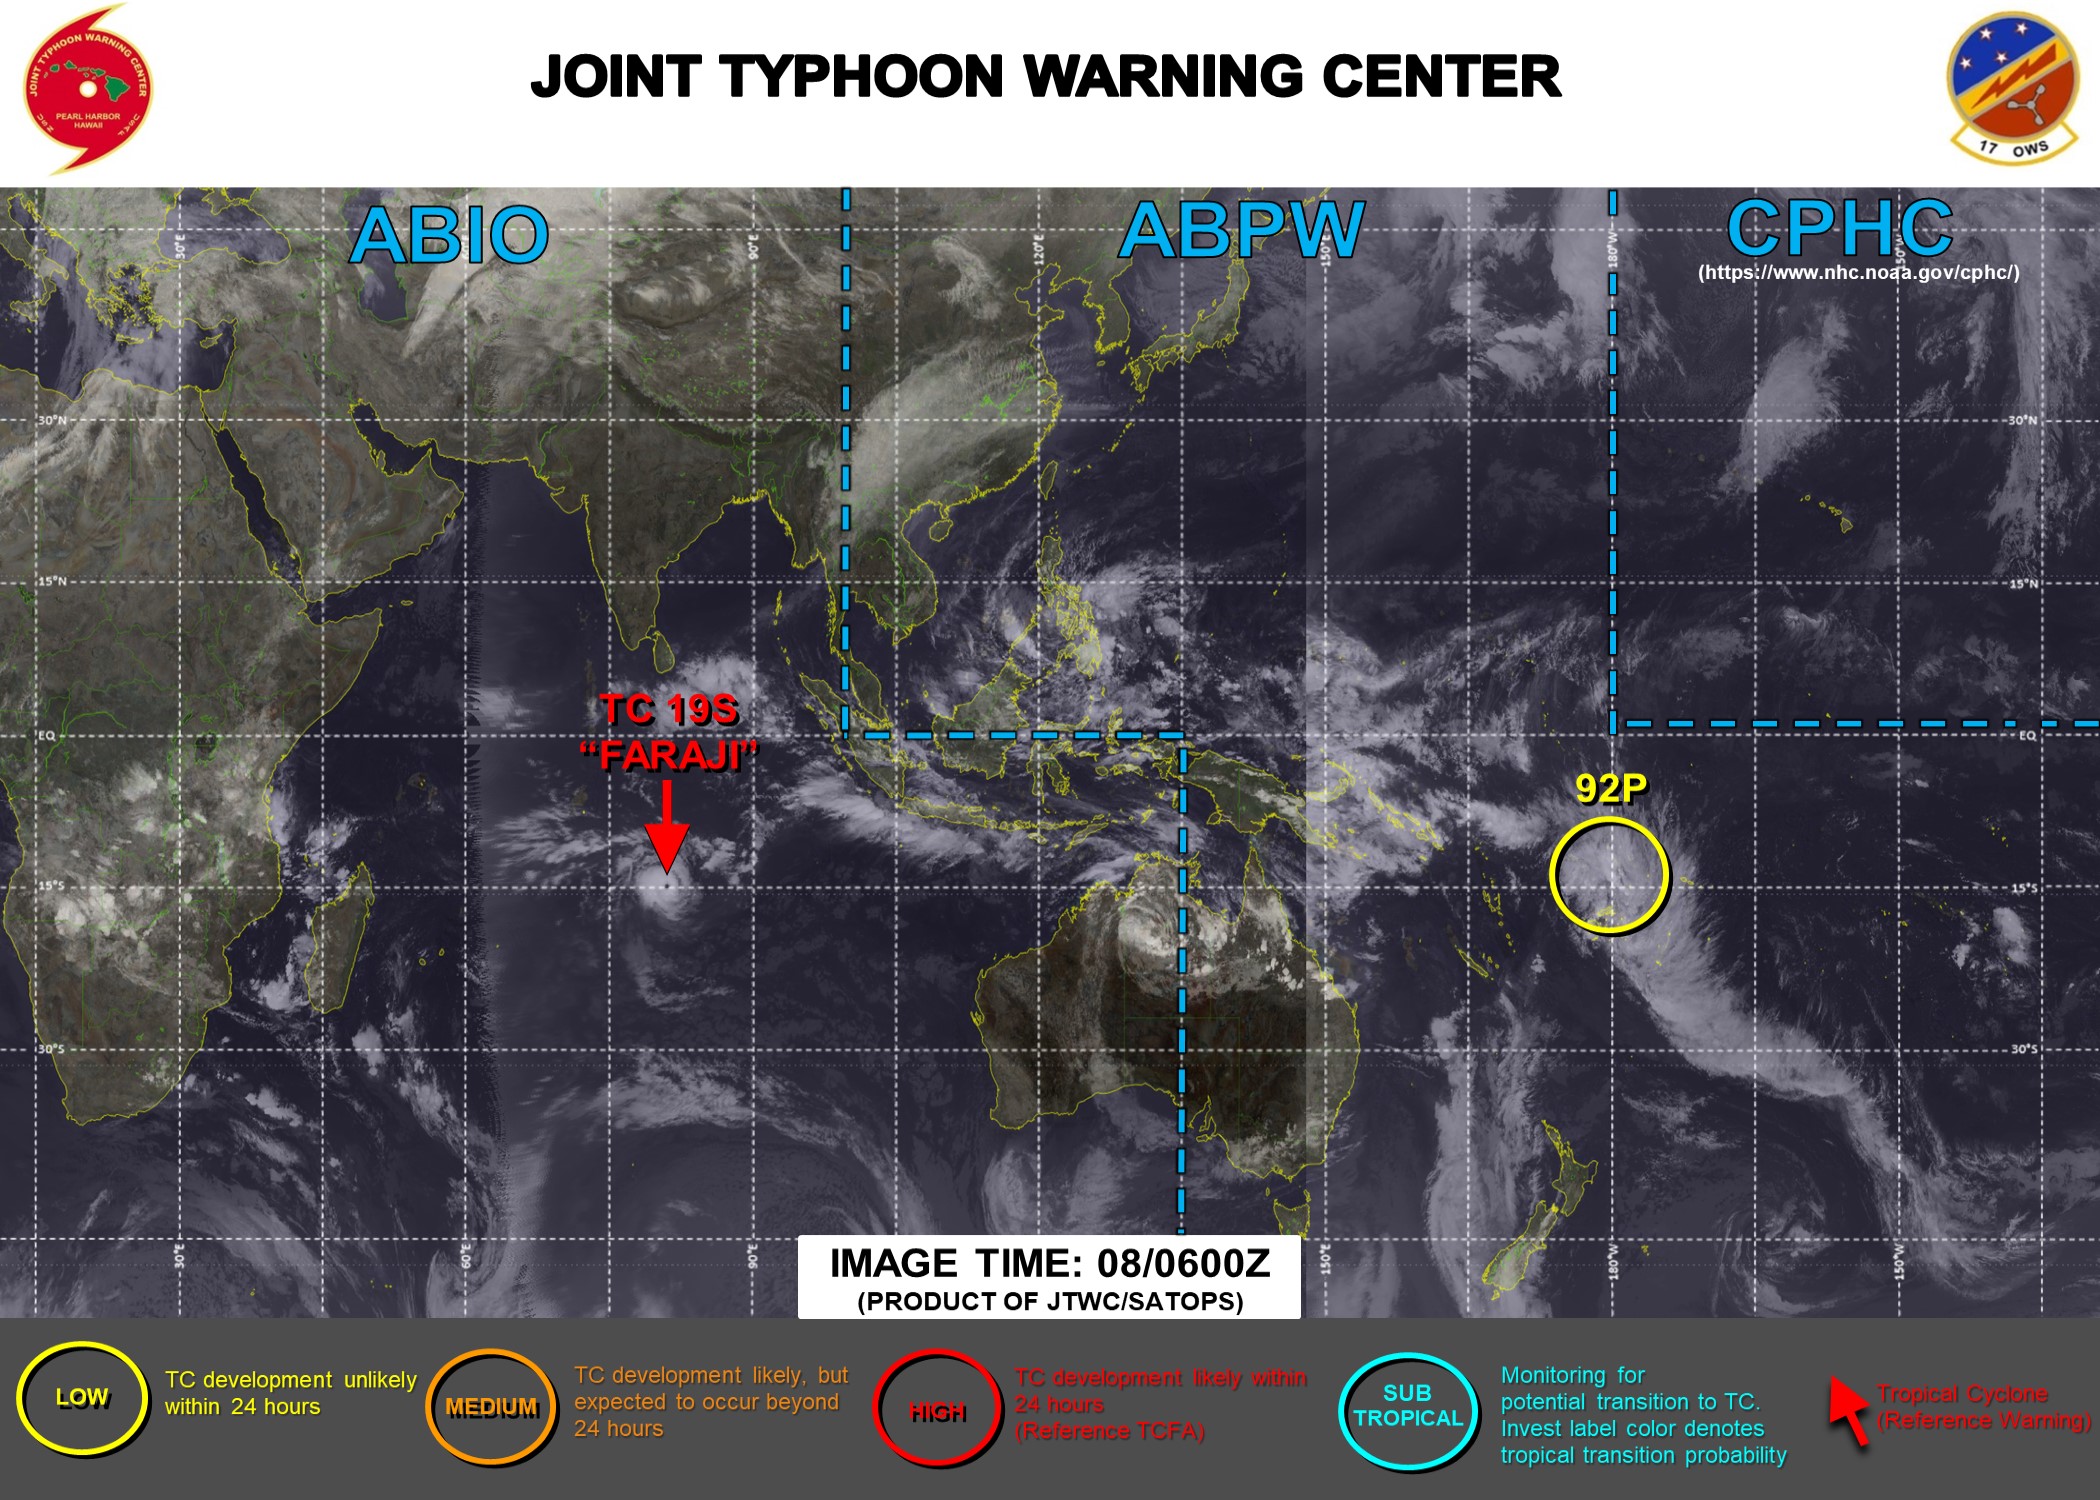 08/06UTC. JTWC IS ISSUING 12HOURLY WARNINGS ON TC 19S(FARAJI). 3HOURLY SATELLITE BULLETINS ARE PROVIDED FOR 19S. INVEST 92P REMAINS UNDER WATCH.